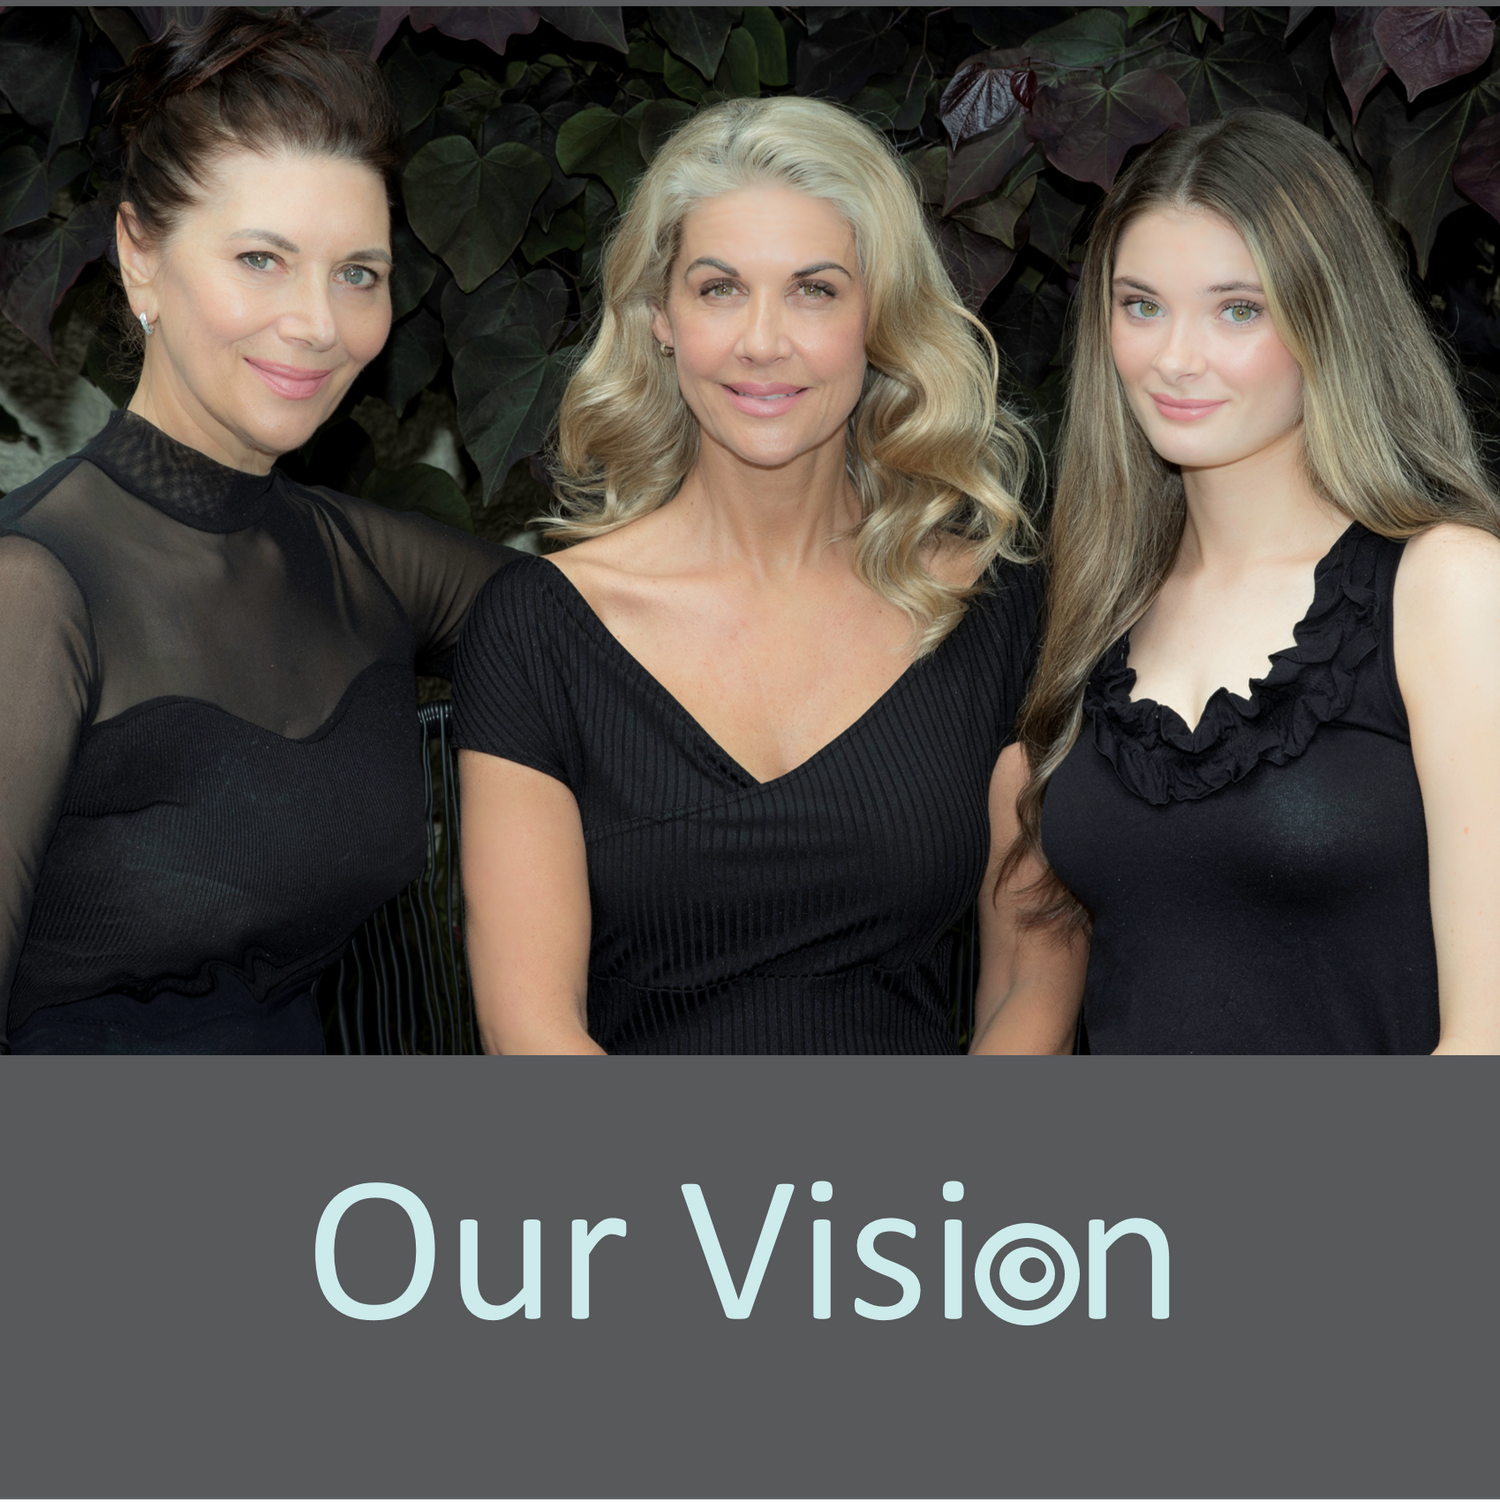 ibody, ibodyNZ, ibody New Zealand. ibody NZ vision: To be the premium skincare brand of choice for women globally who want healthy beautiful looking skin regardless of age.